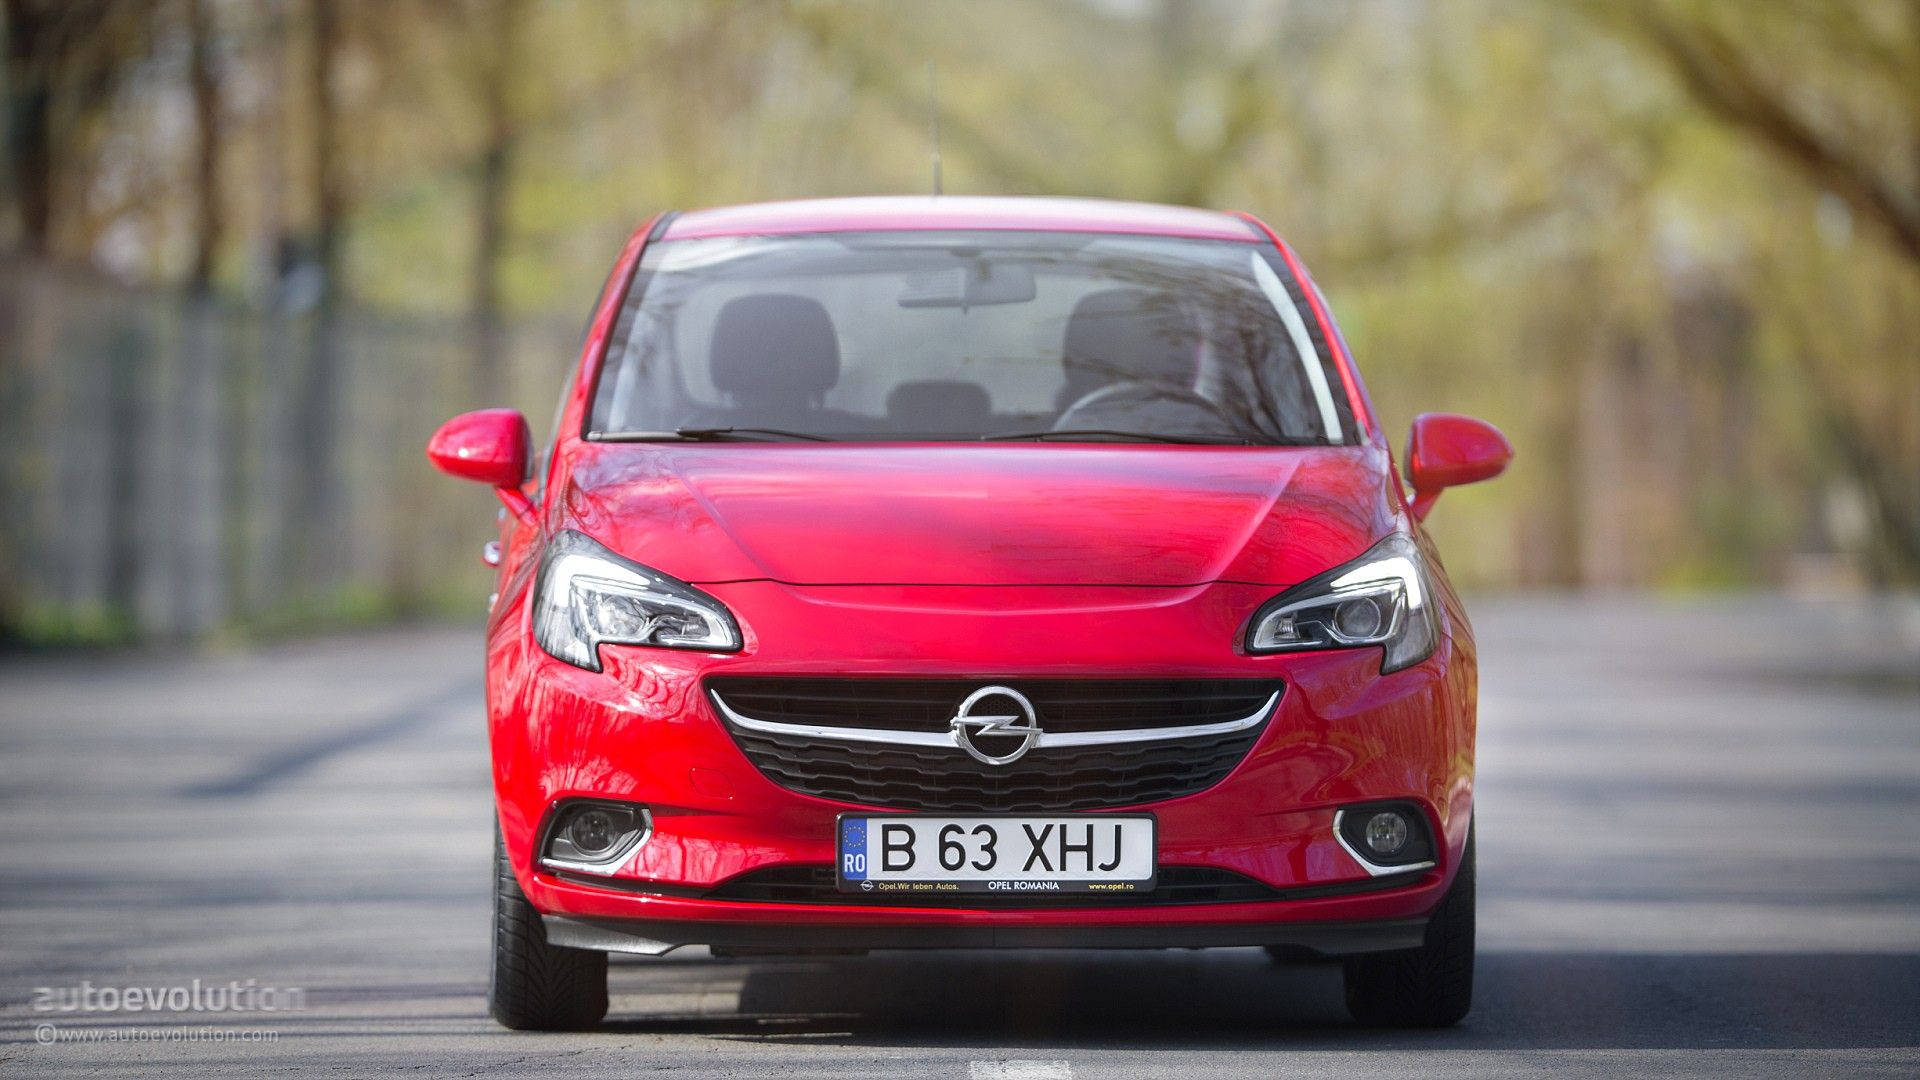 Red Opel Corsa Background